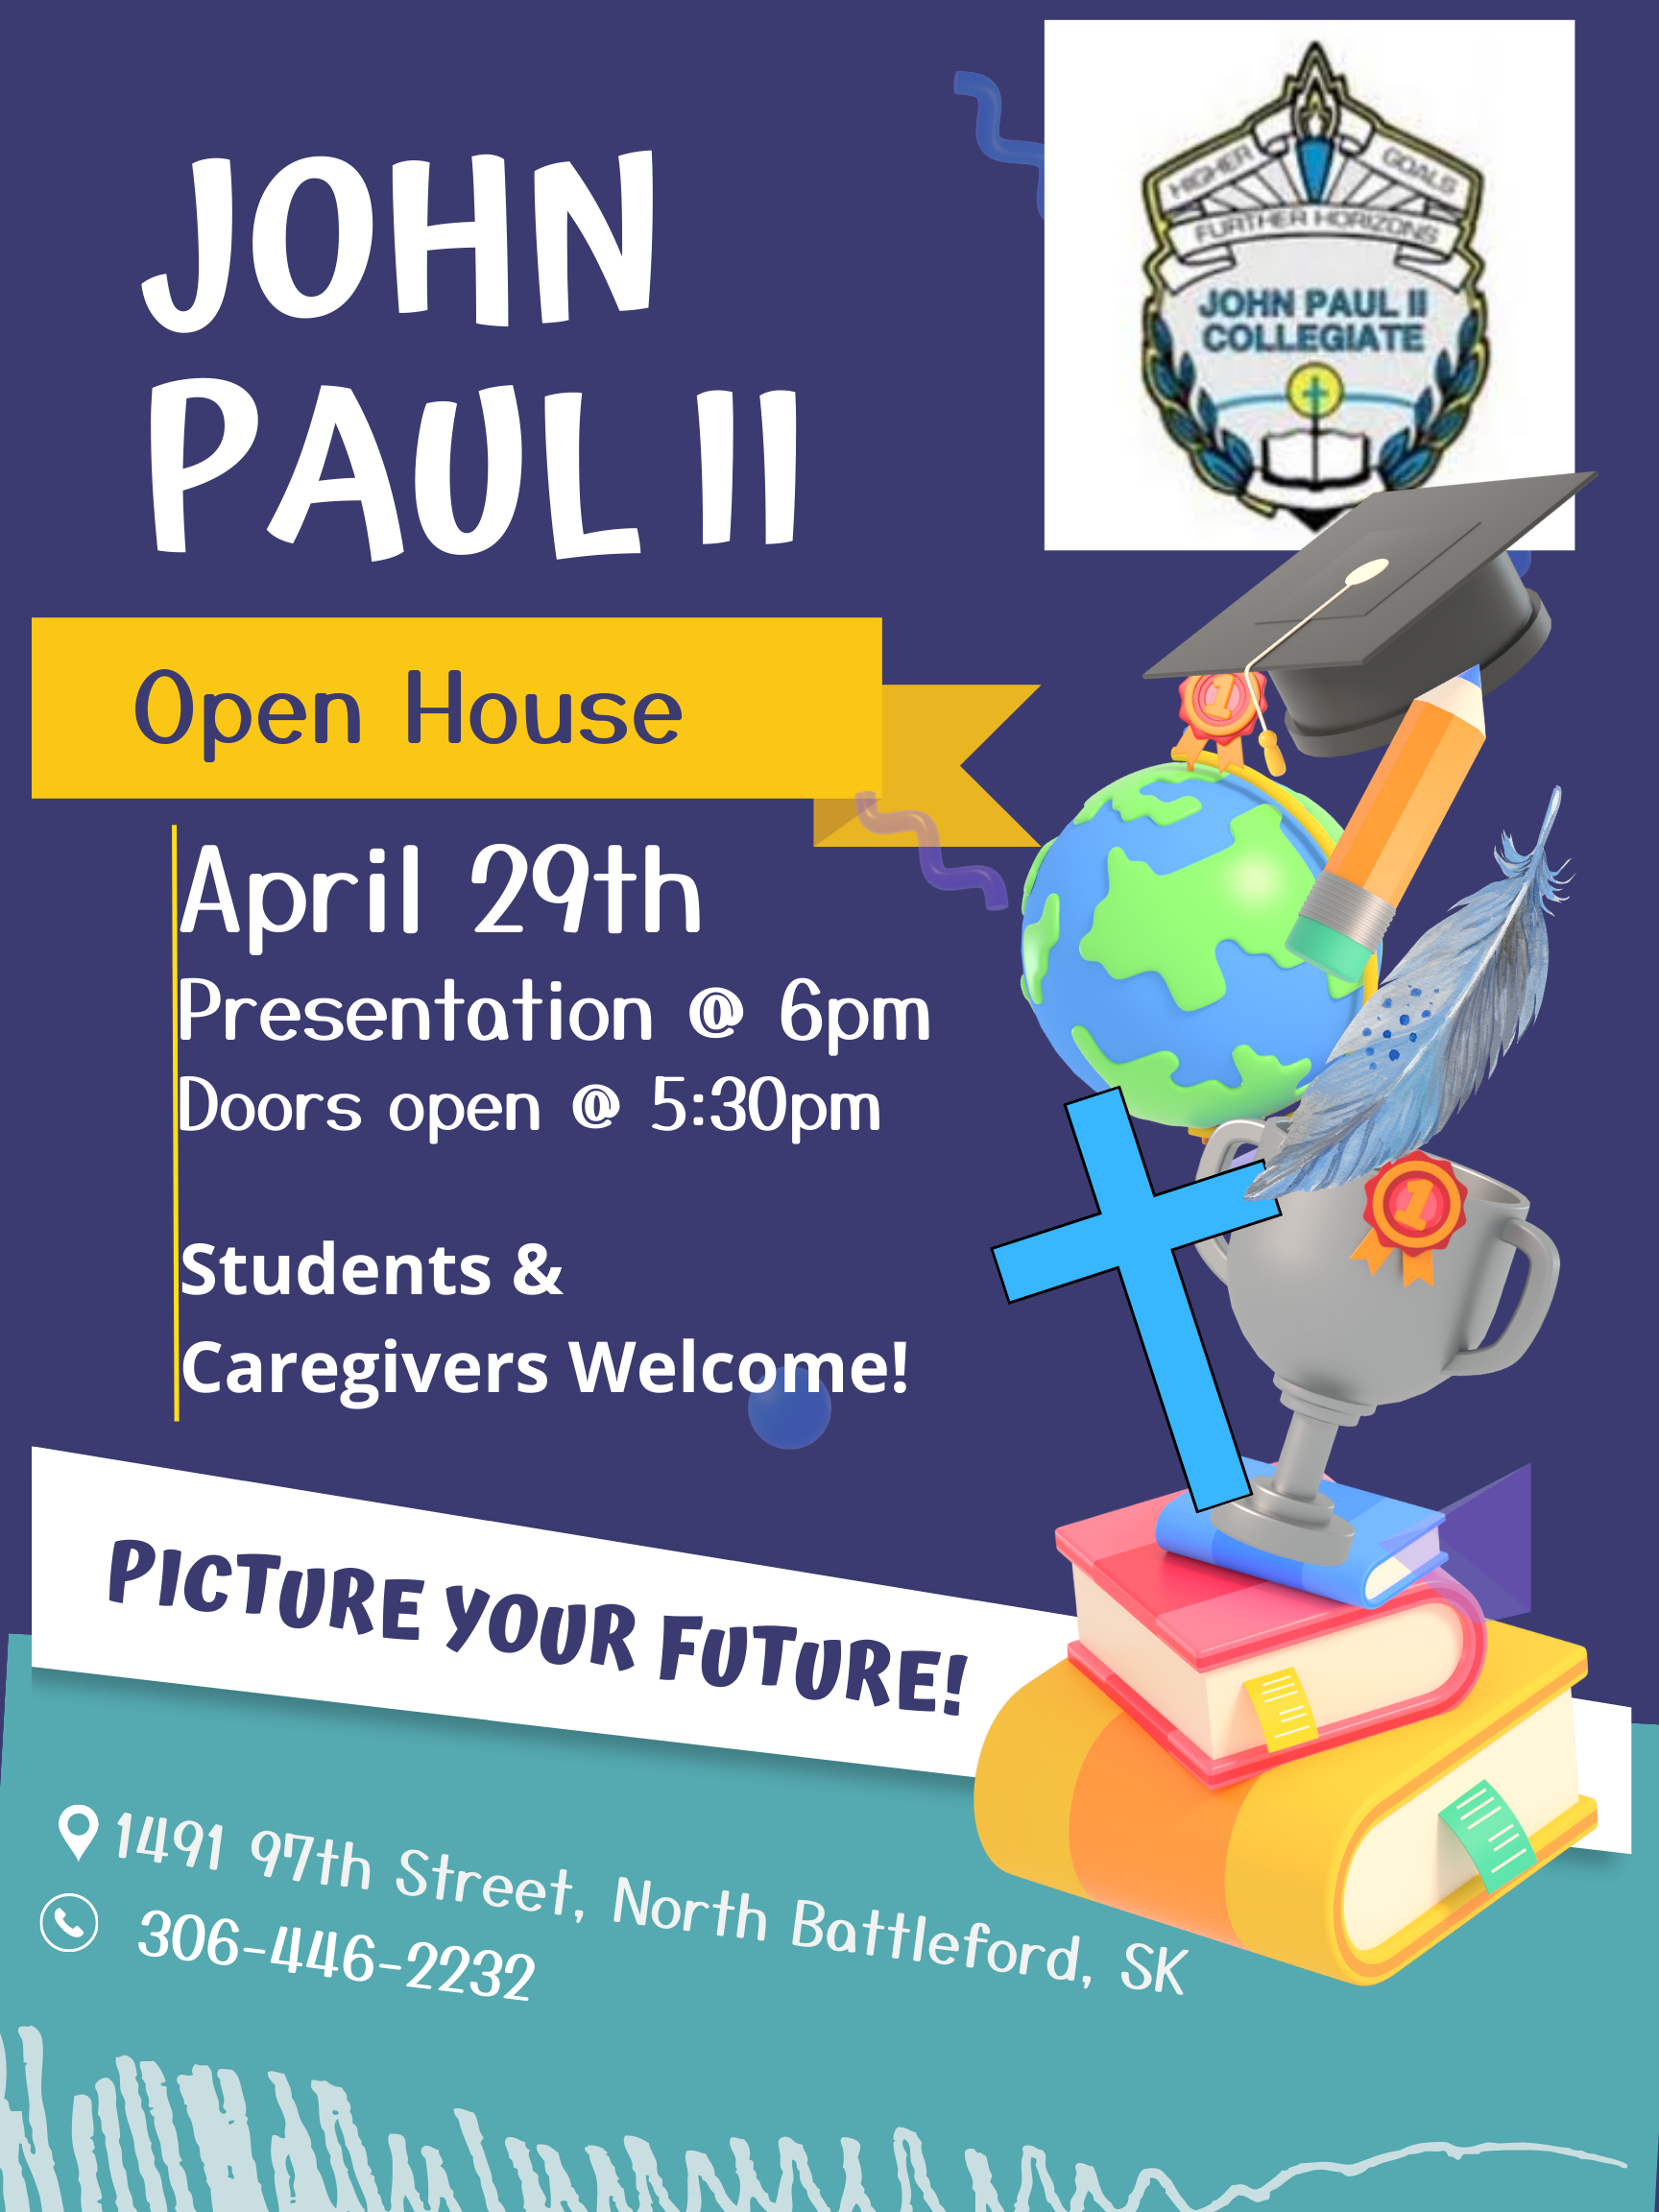 New Date for JPII's Open House